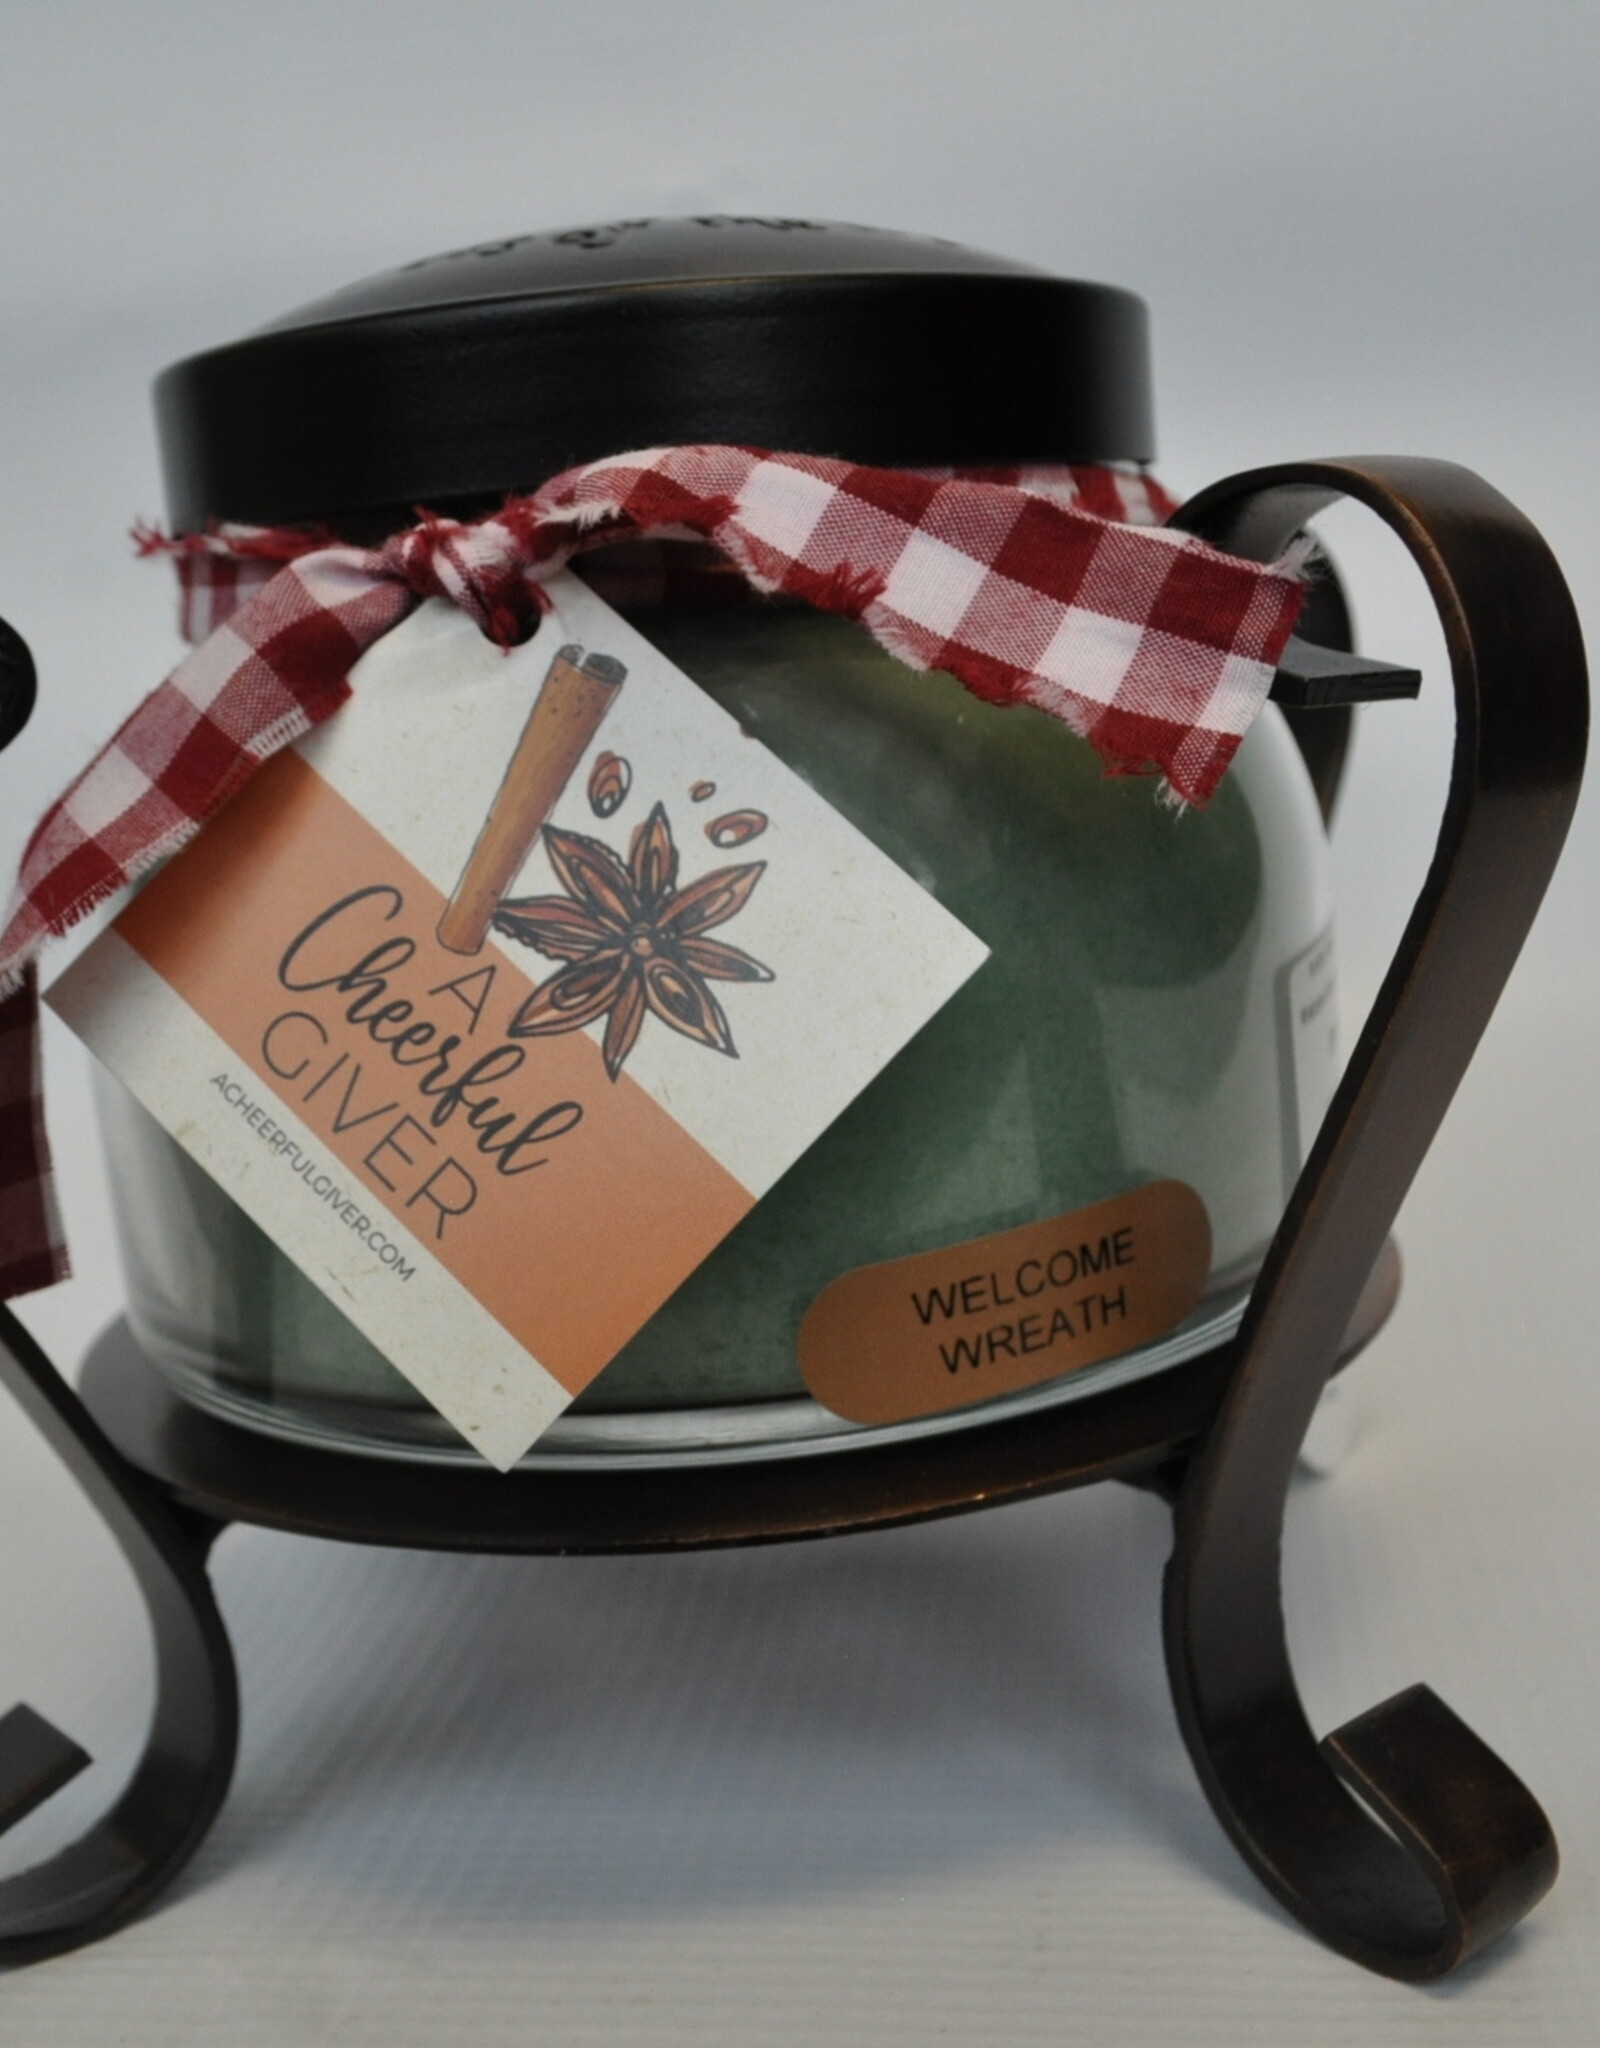 Cheerful Giver Welcome Wreath Candle 22oz